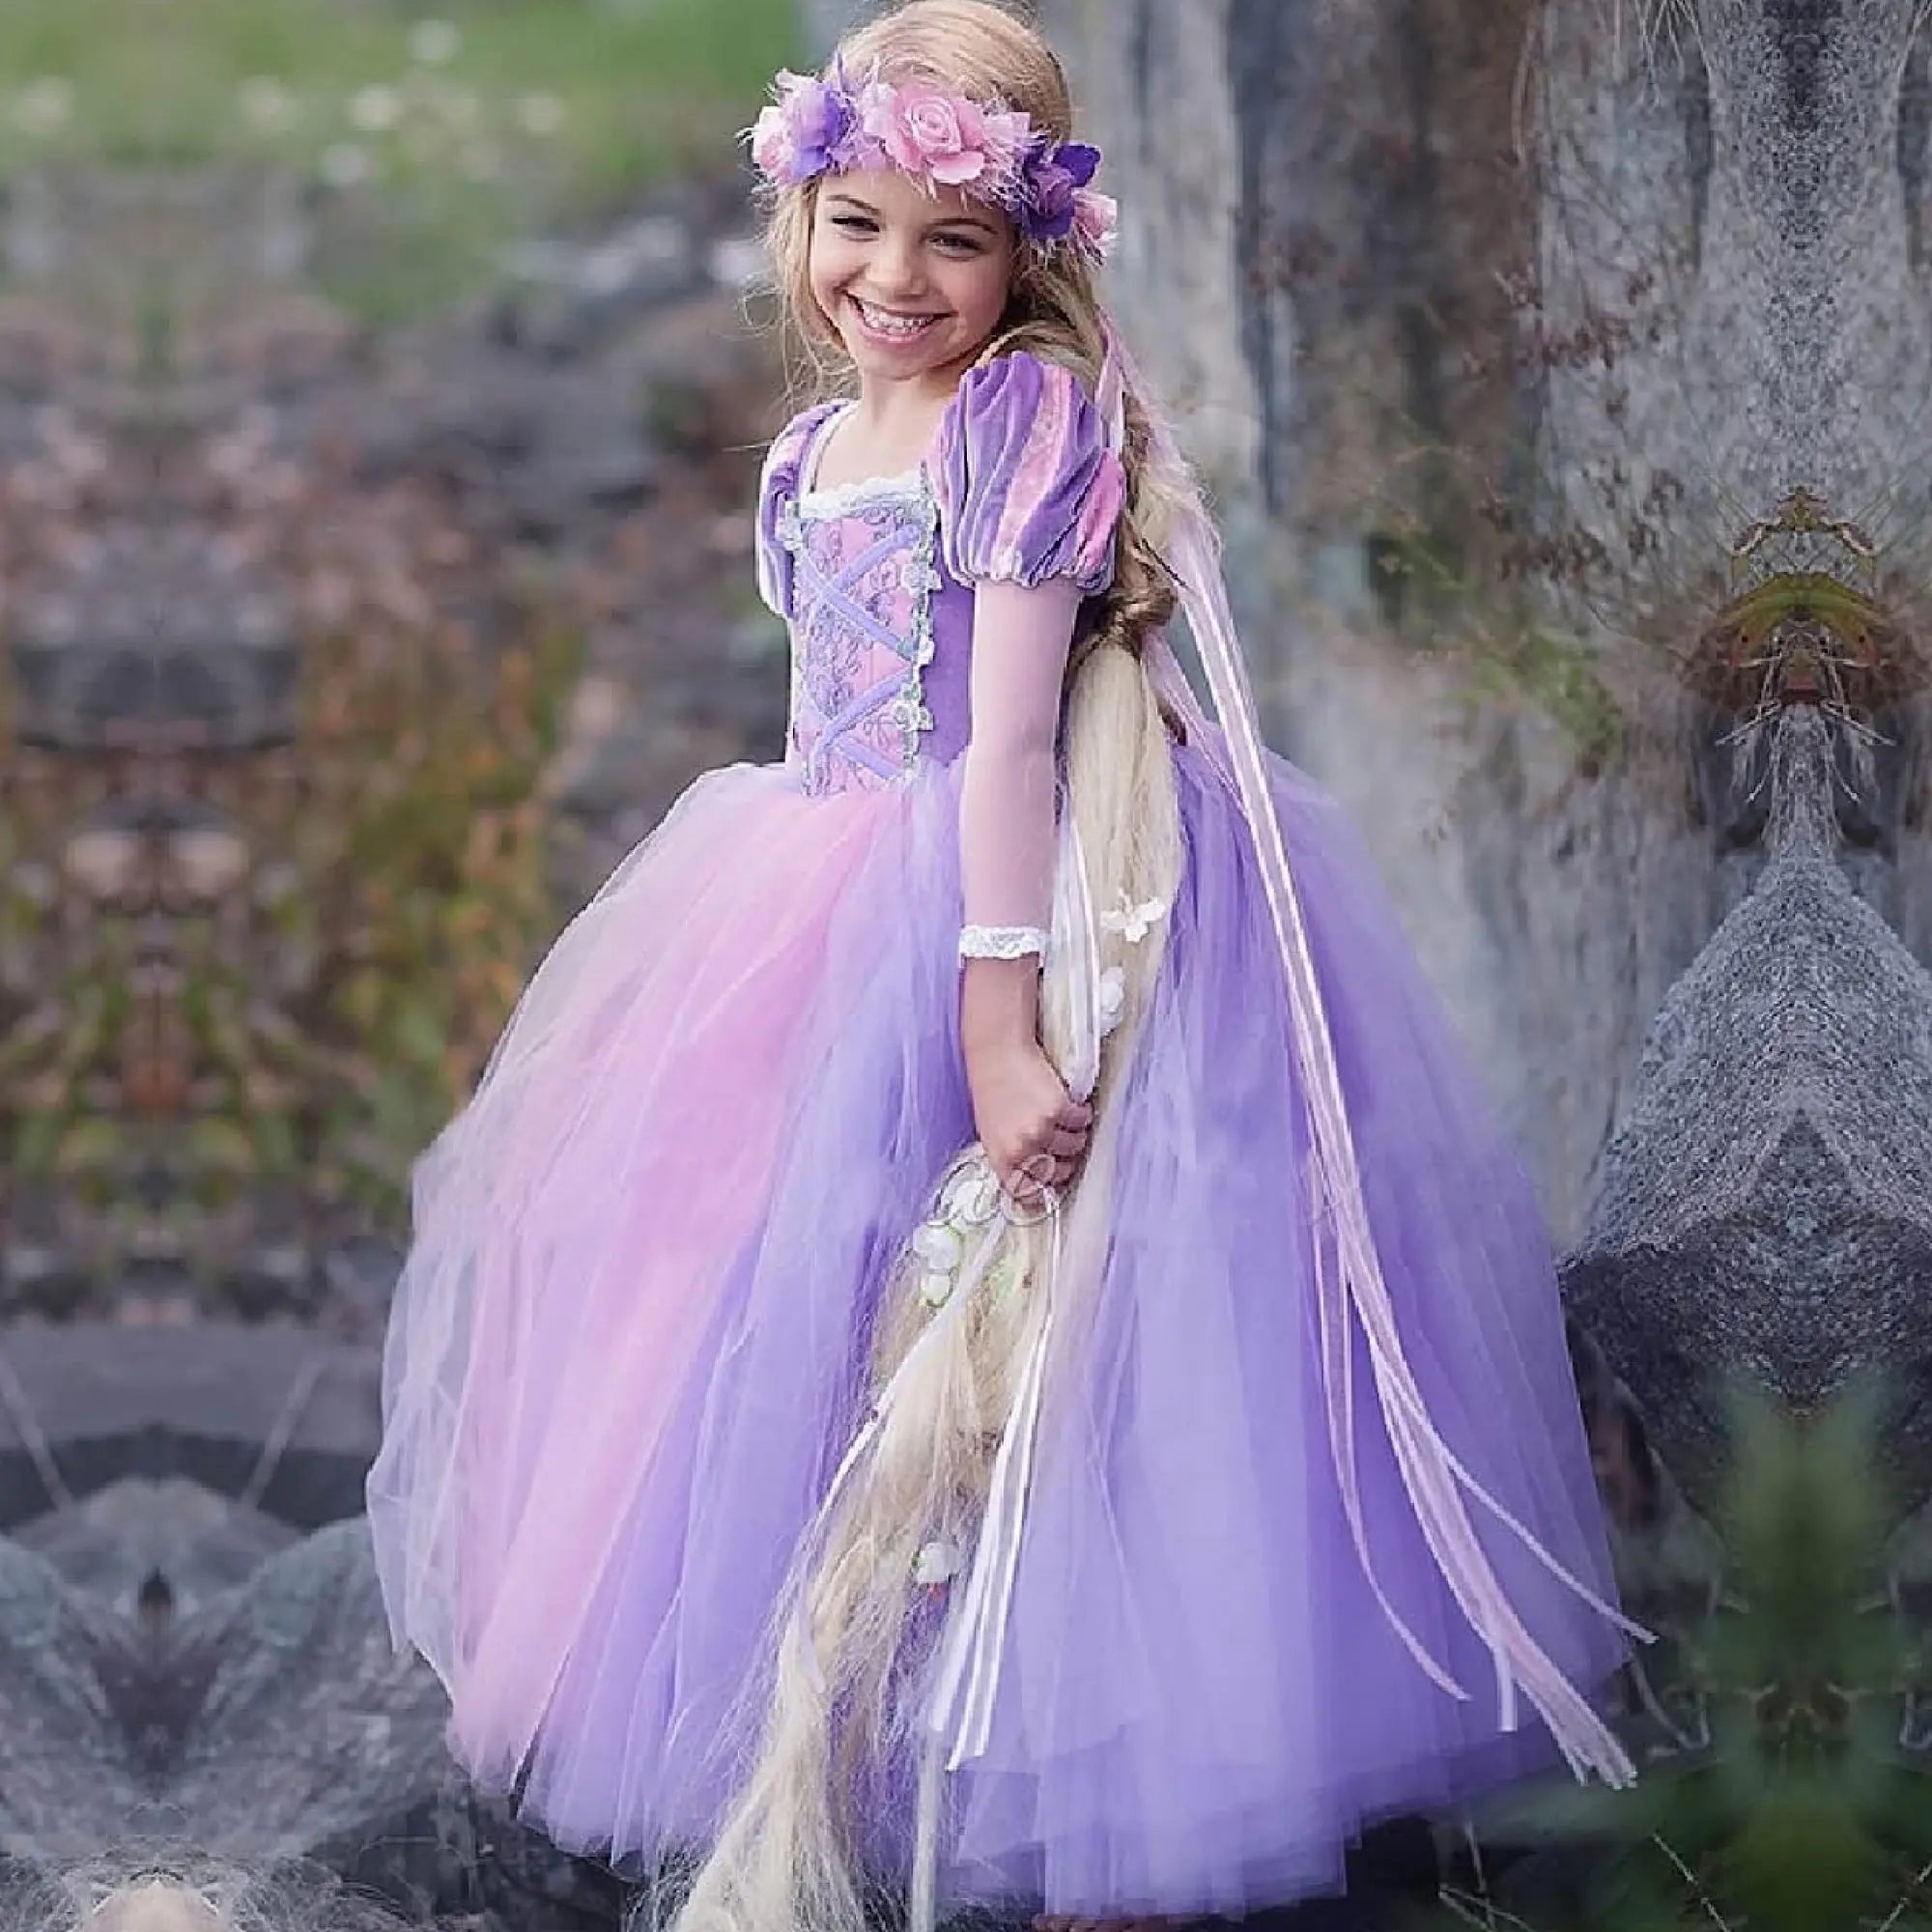 Girls Rapunzel Tangled Long Sleeve Princess Dress with Accessories Bling Bling Baby Boutique